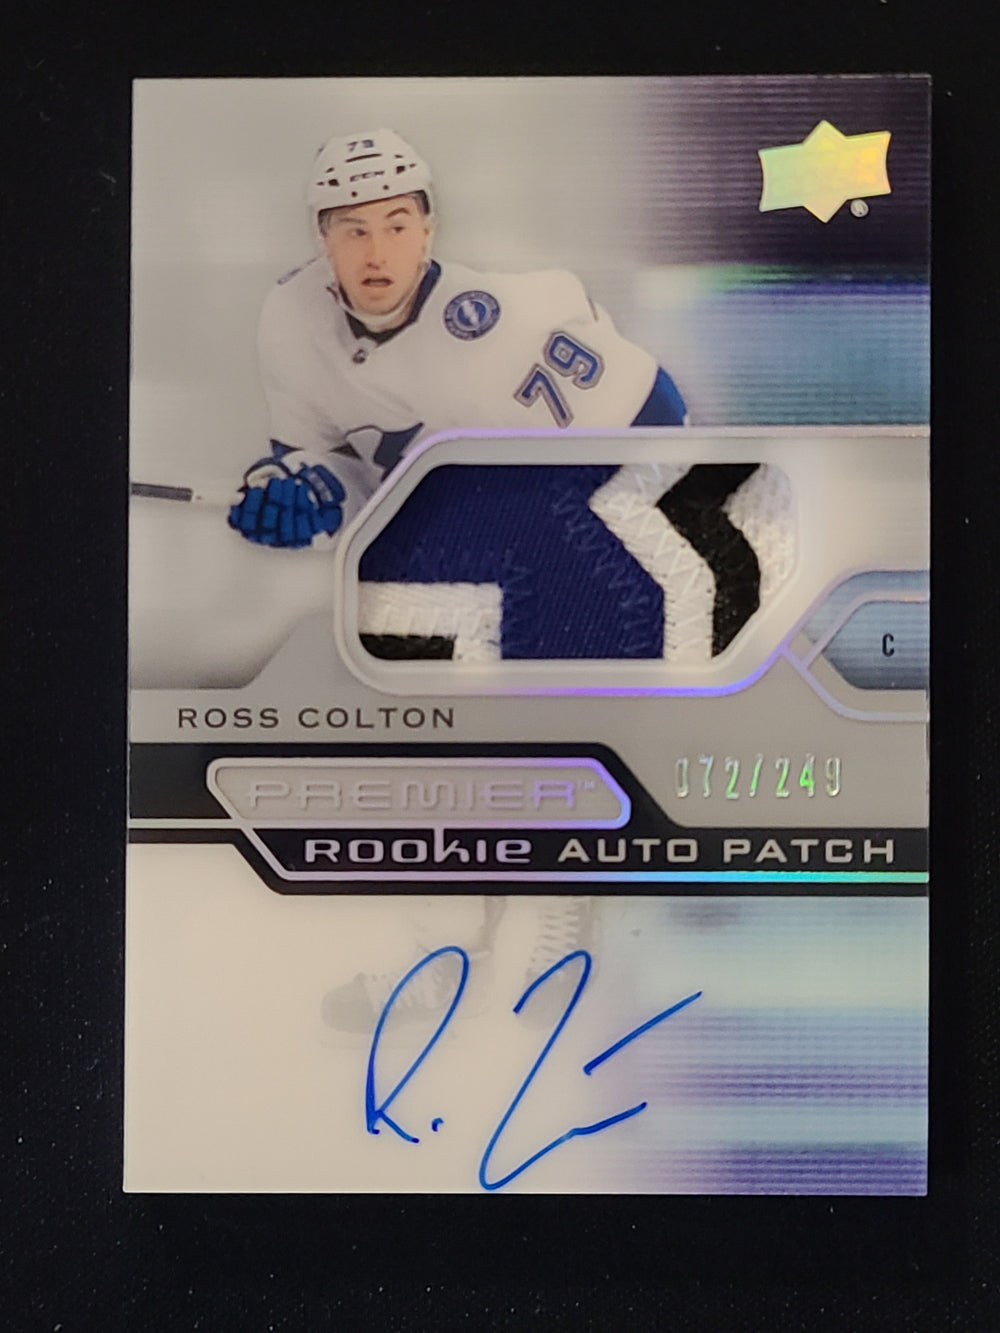 2021-22 Premier Rookie Auto Patch #AR-RC Ross Colton Tampa Bay Lightning 72/249